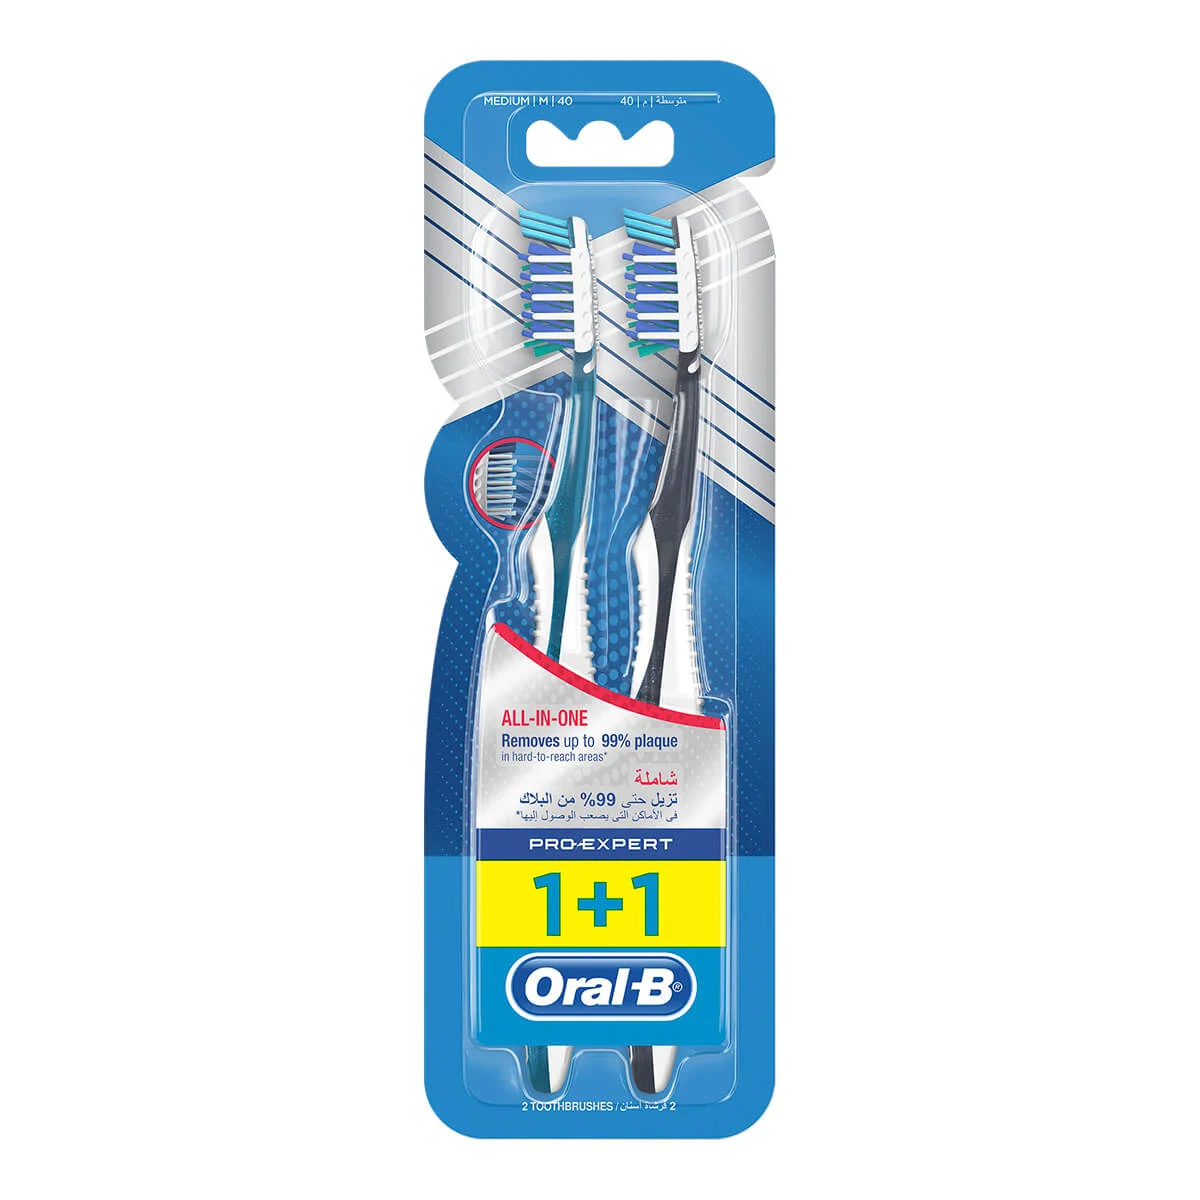 Oral-B Pro-Expert All In One Manual Toothbrush 